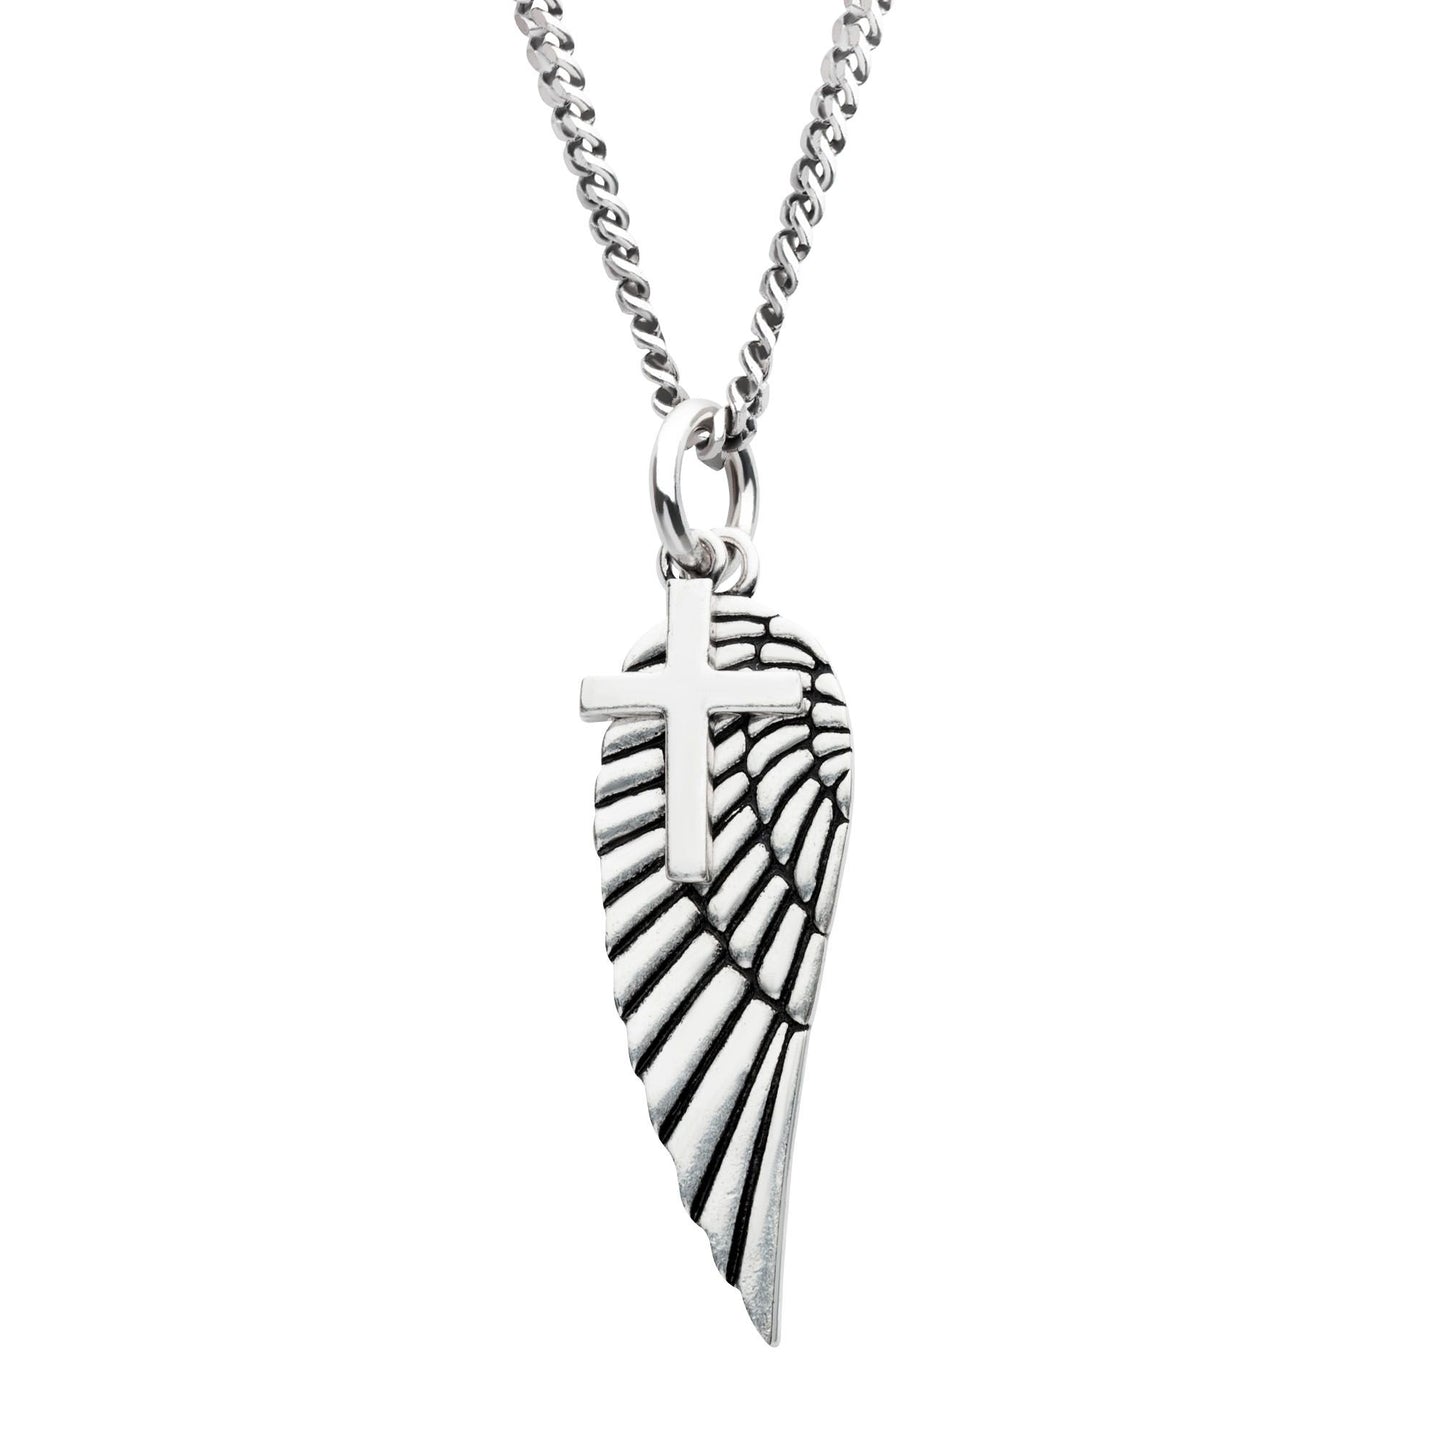 Silver Oxidized Cross & Angel Wing Necklace